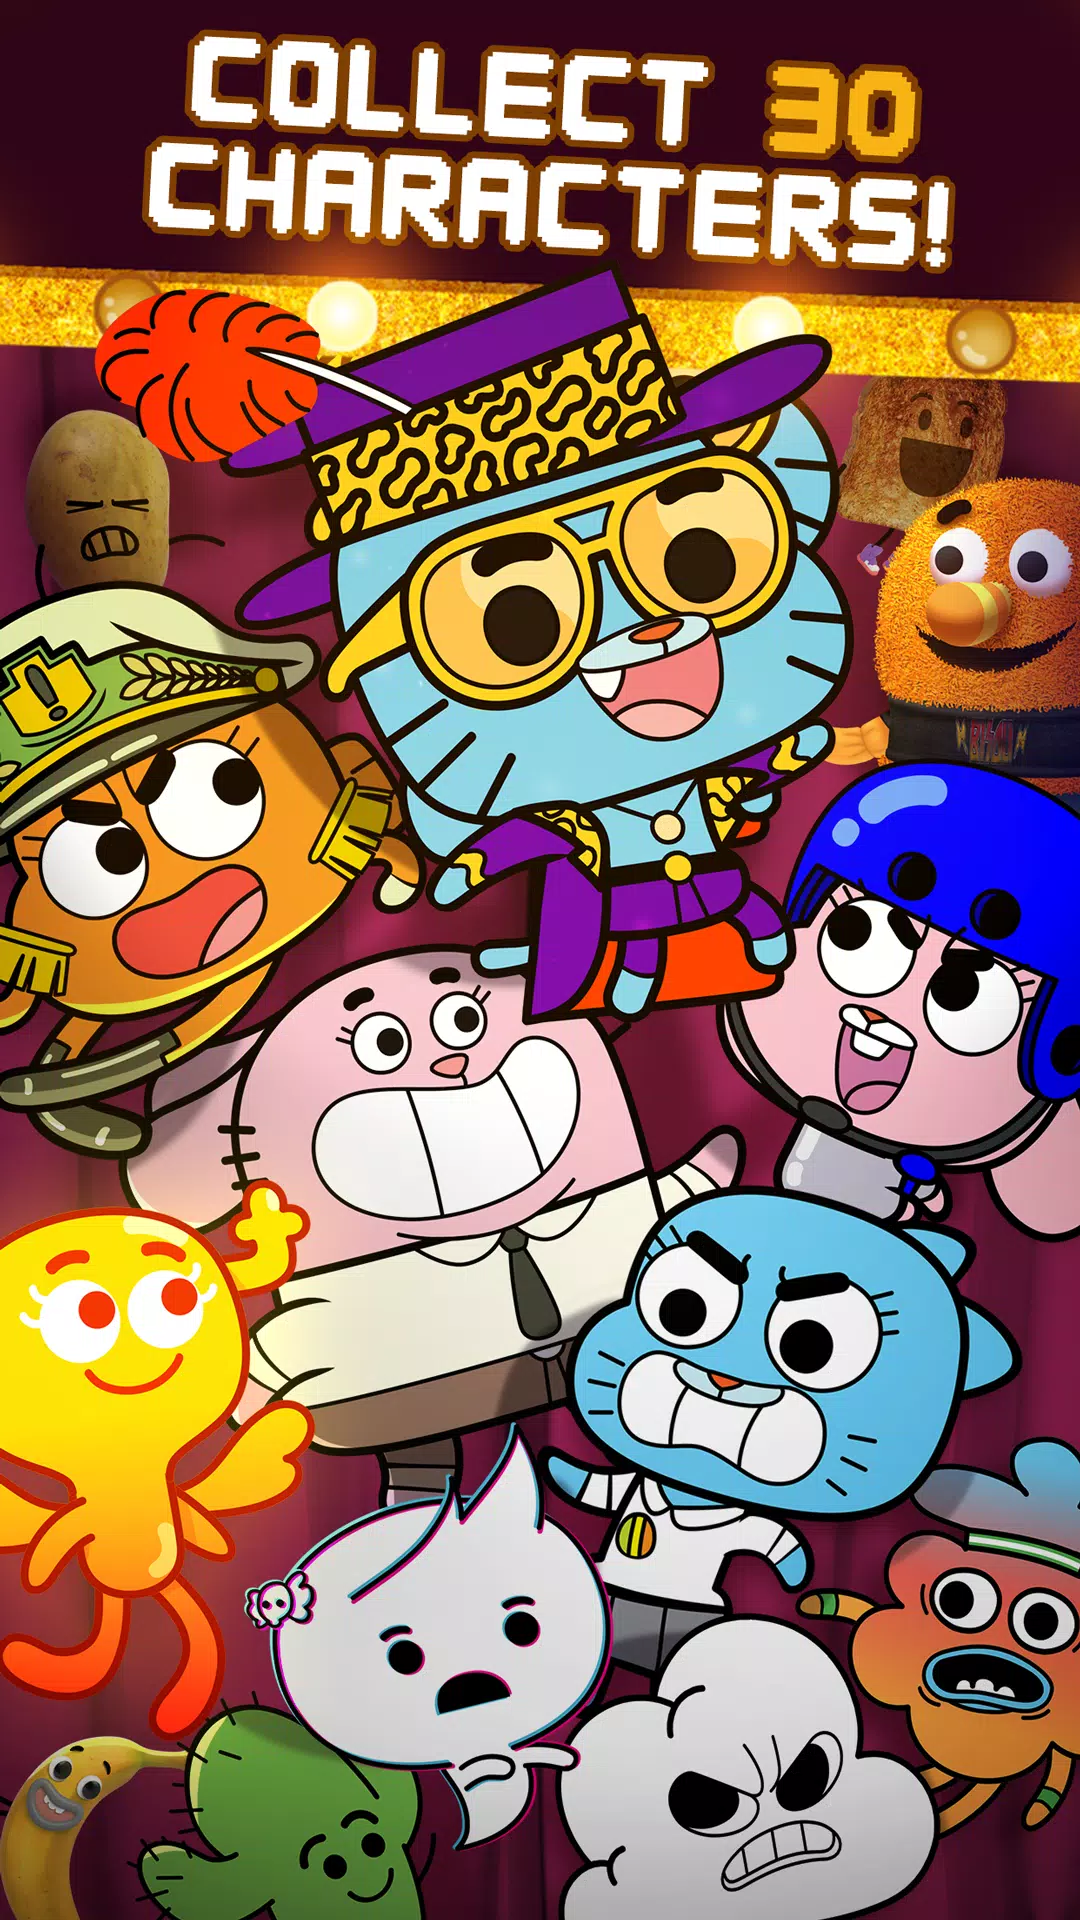 Gumball Wrecker's Revenge - Free Gumball Game for Android - Download